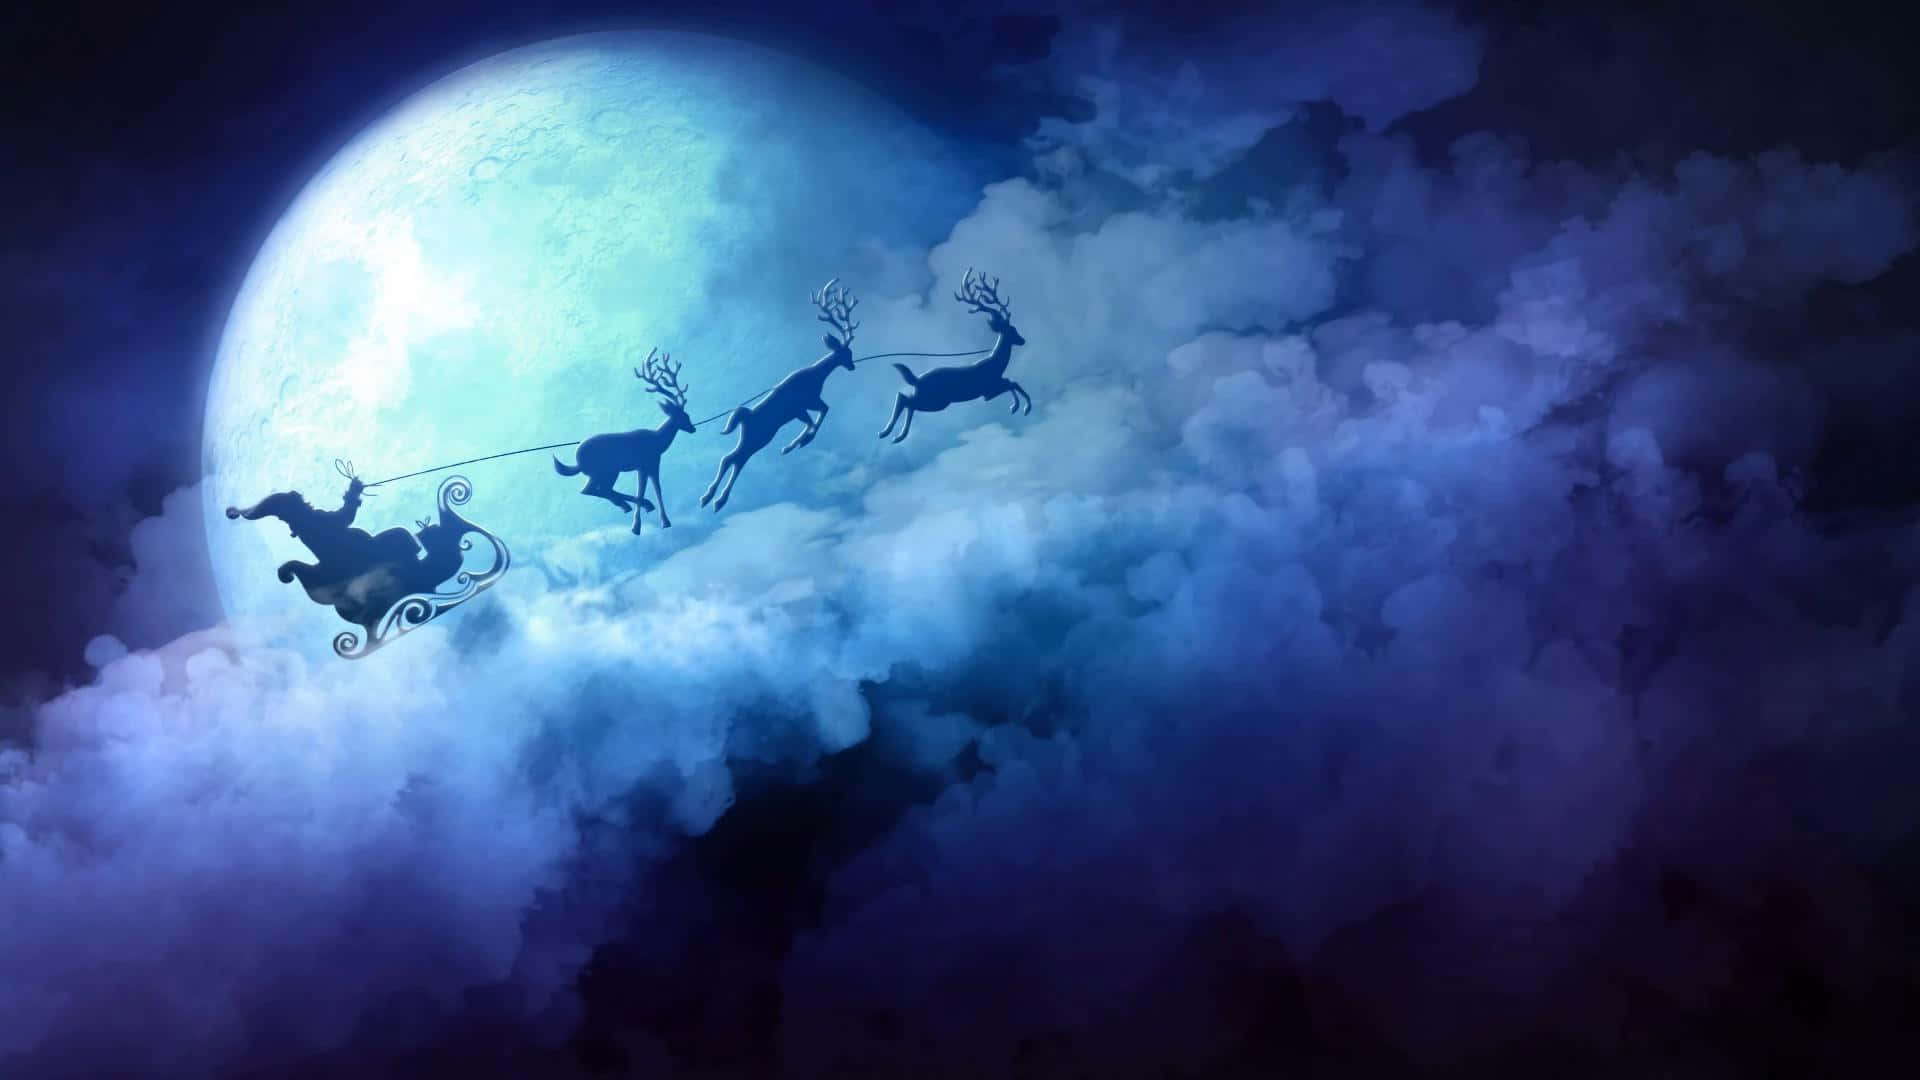 Get your festive desktop dazzle on with this Christmas Desktop Background!